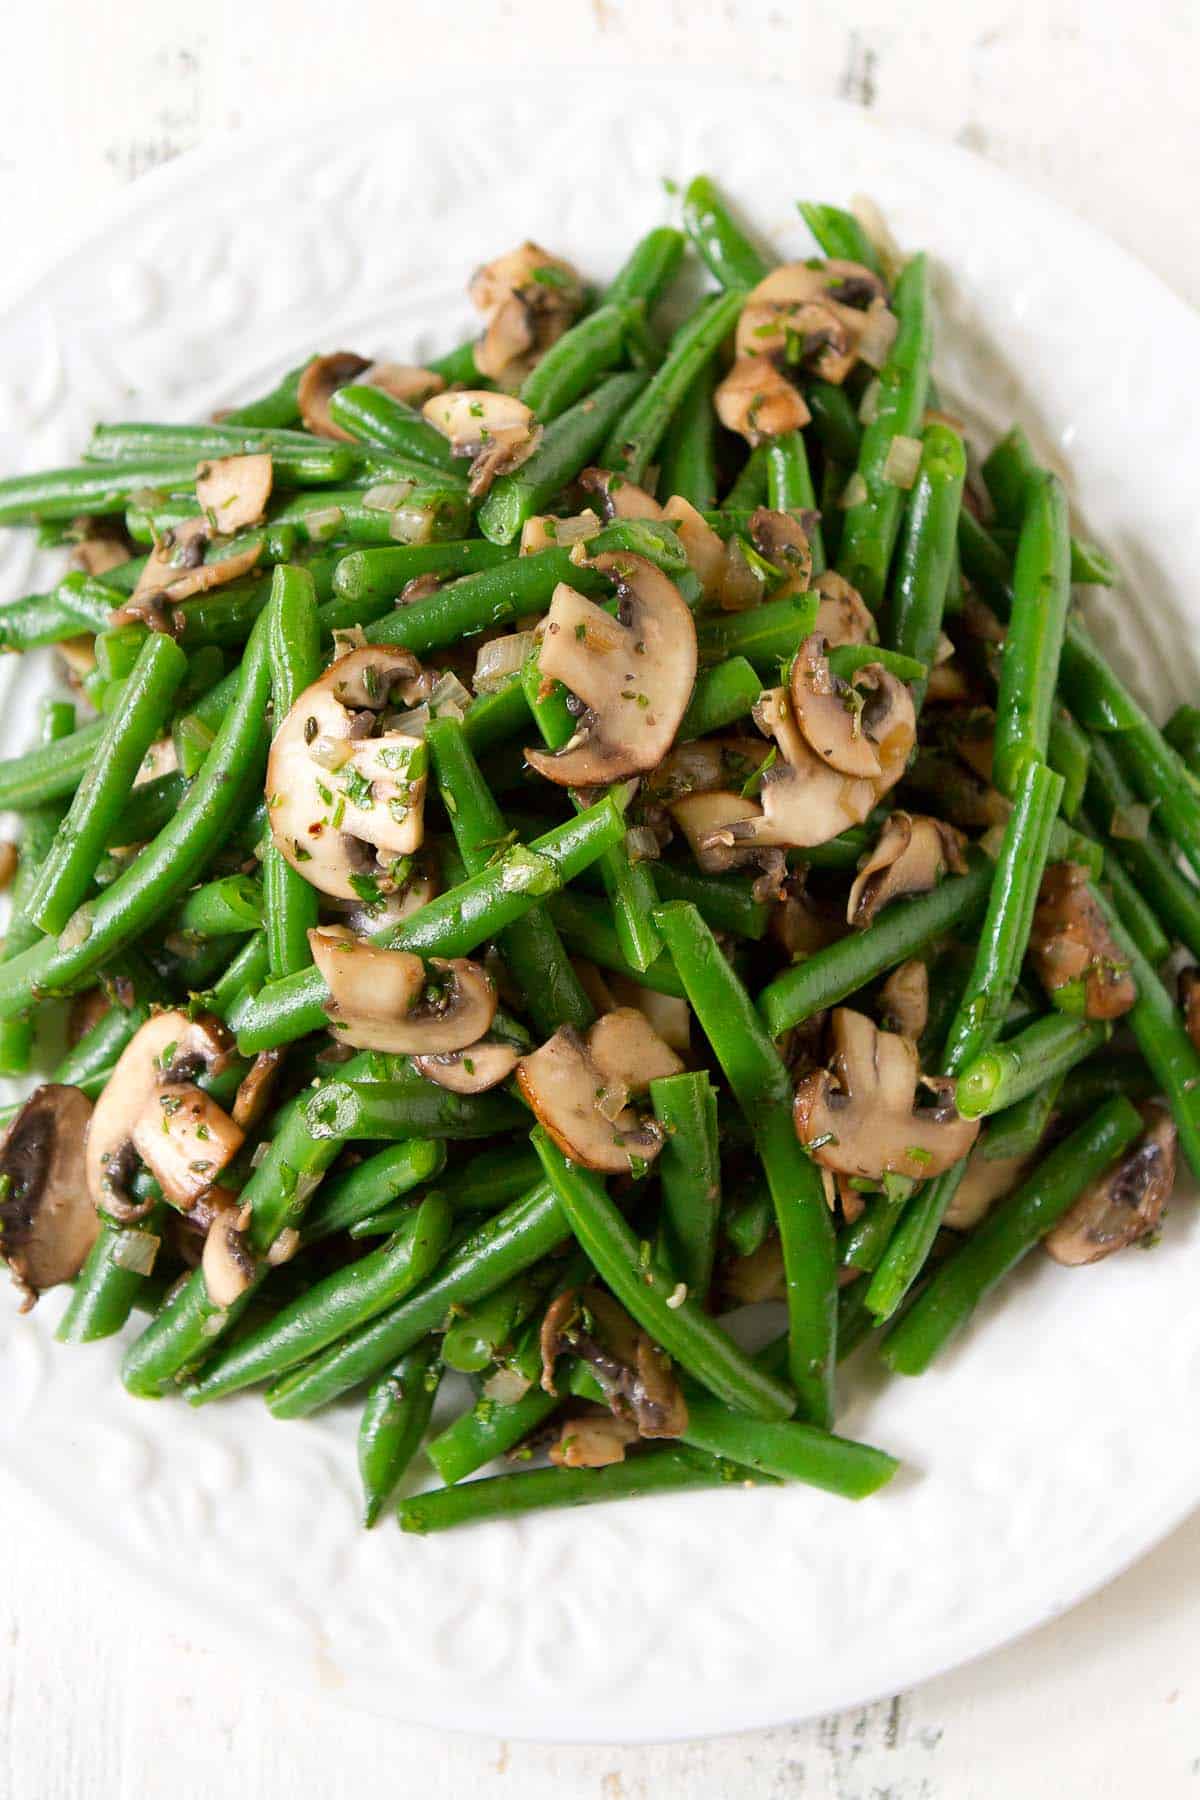 Sautéed green beans and mushrooms on a white plate.